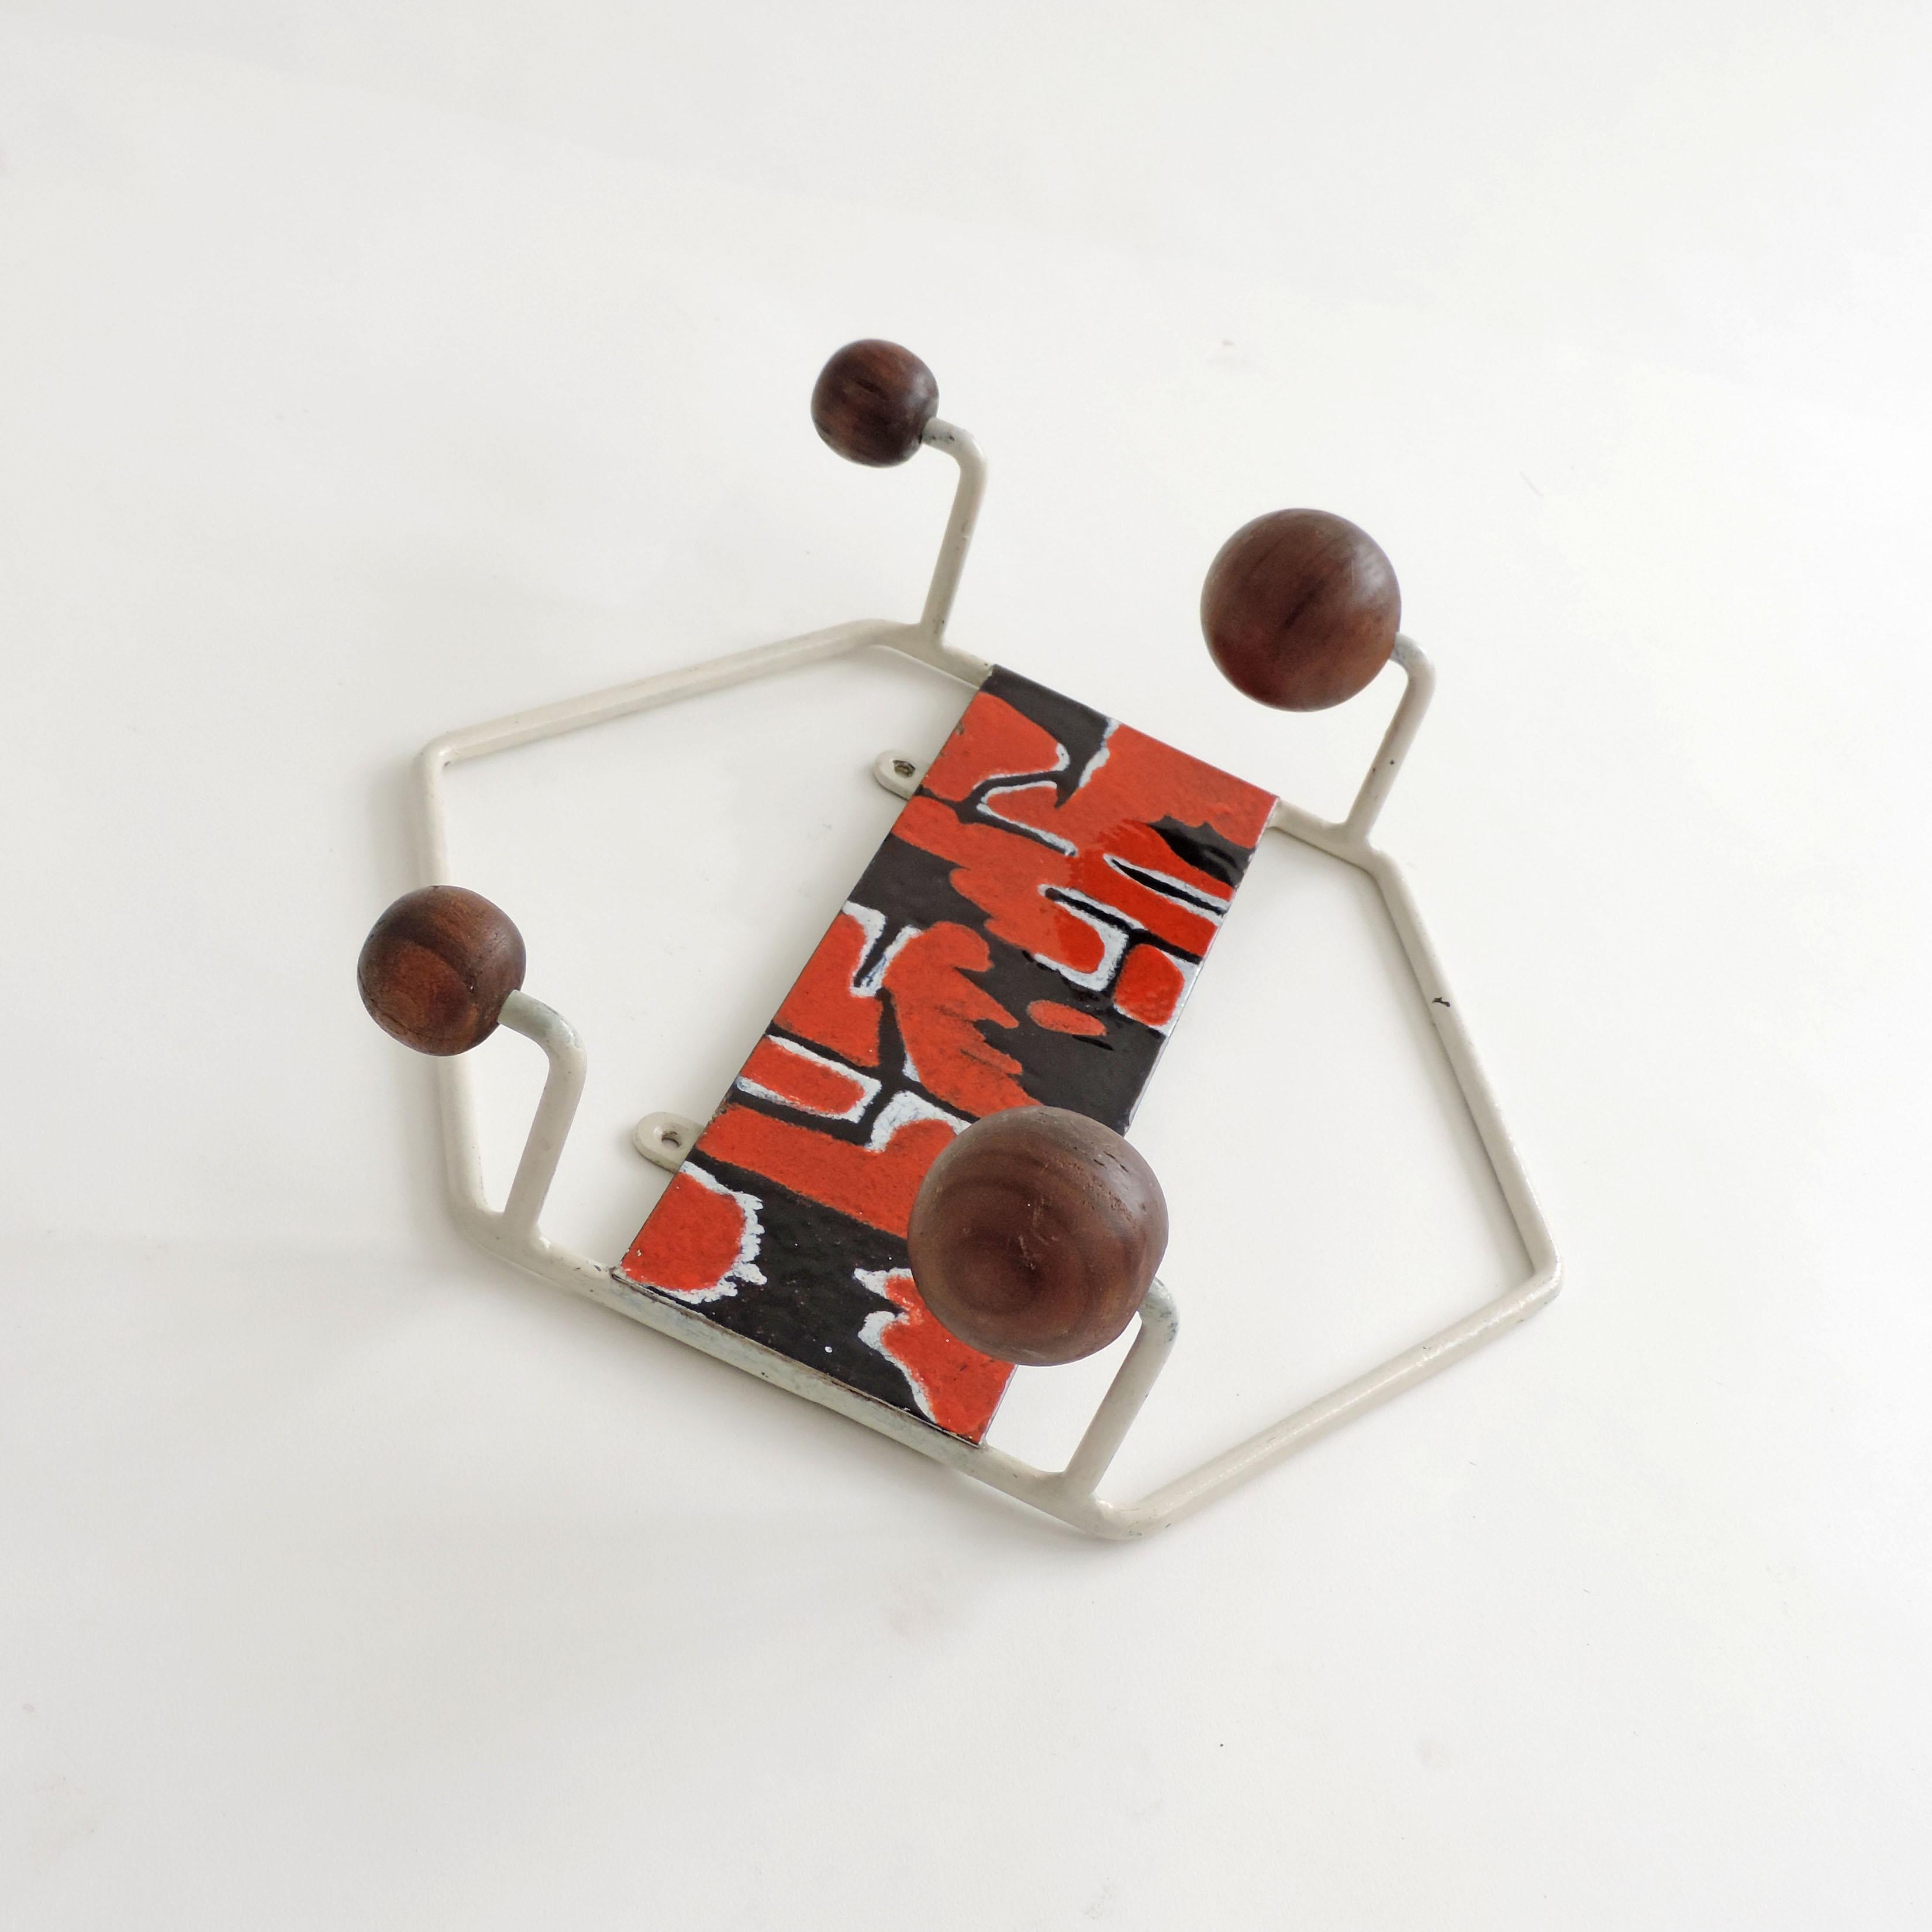 Mid-20th Century Italian Enamel Decorated Wall Coat Hanger, 1960s For Sale